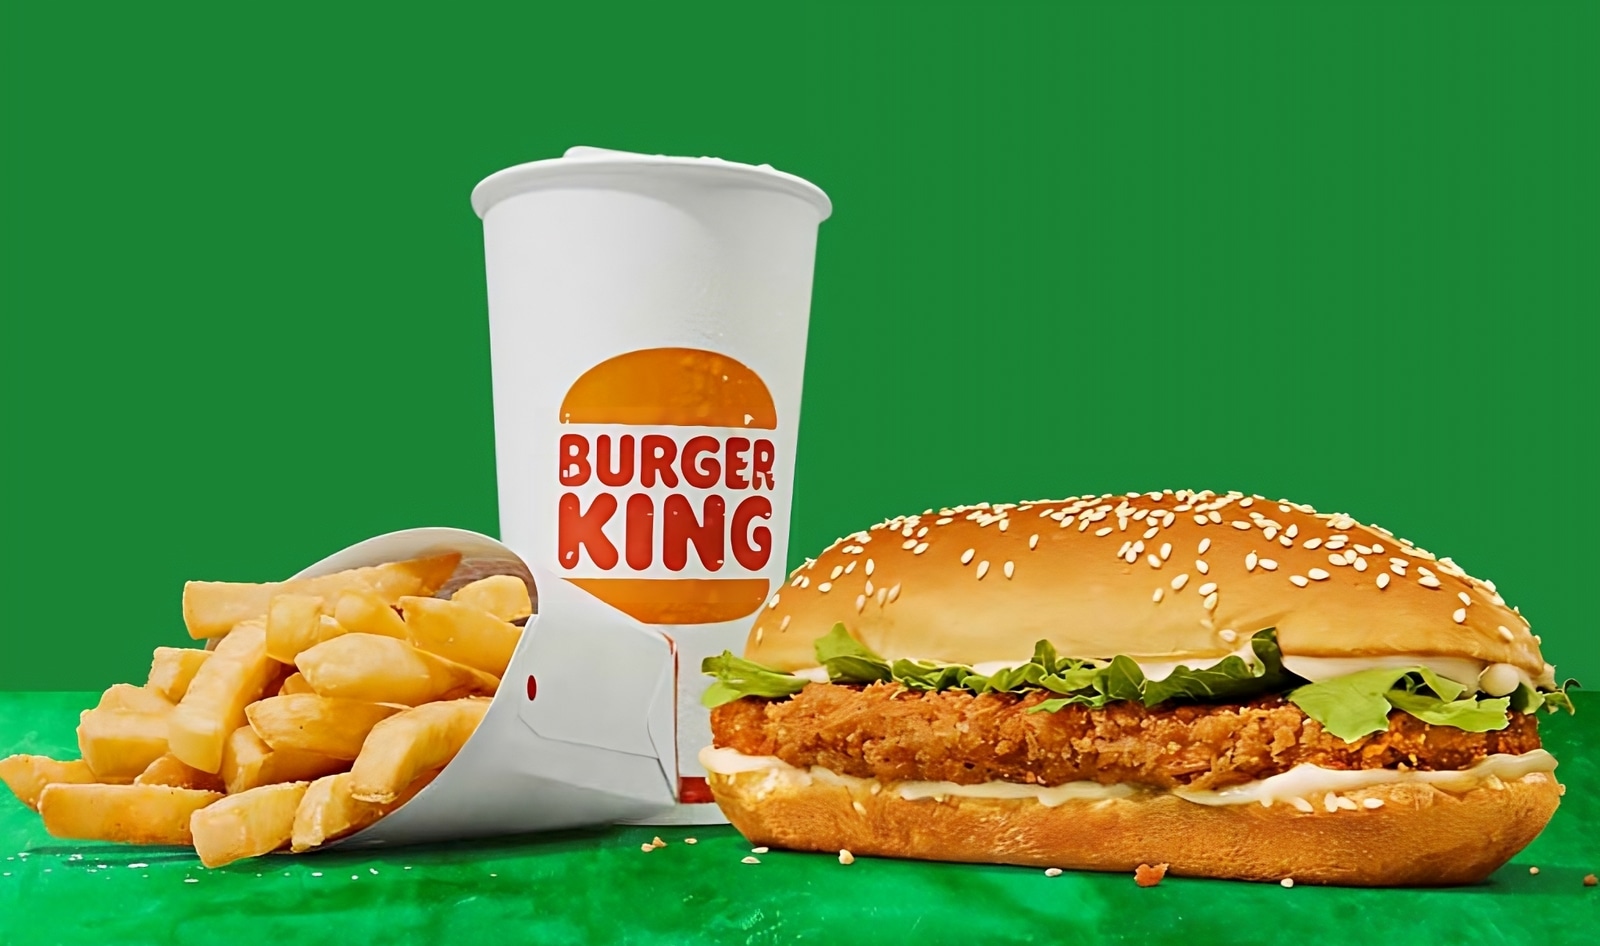 Burger King's Vegan Chicken Confuses Kids in Cute Ad: "Does This Count Like a Vegetable?”